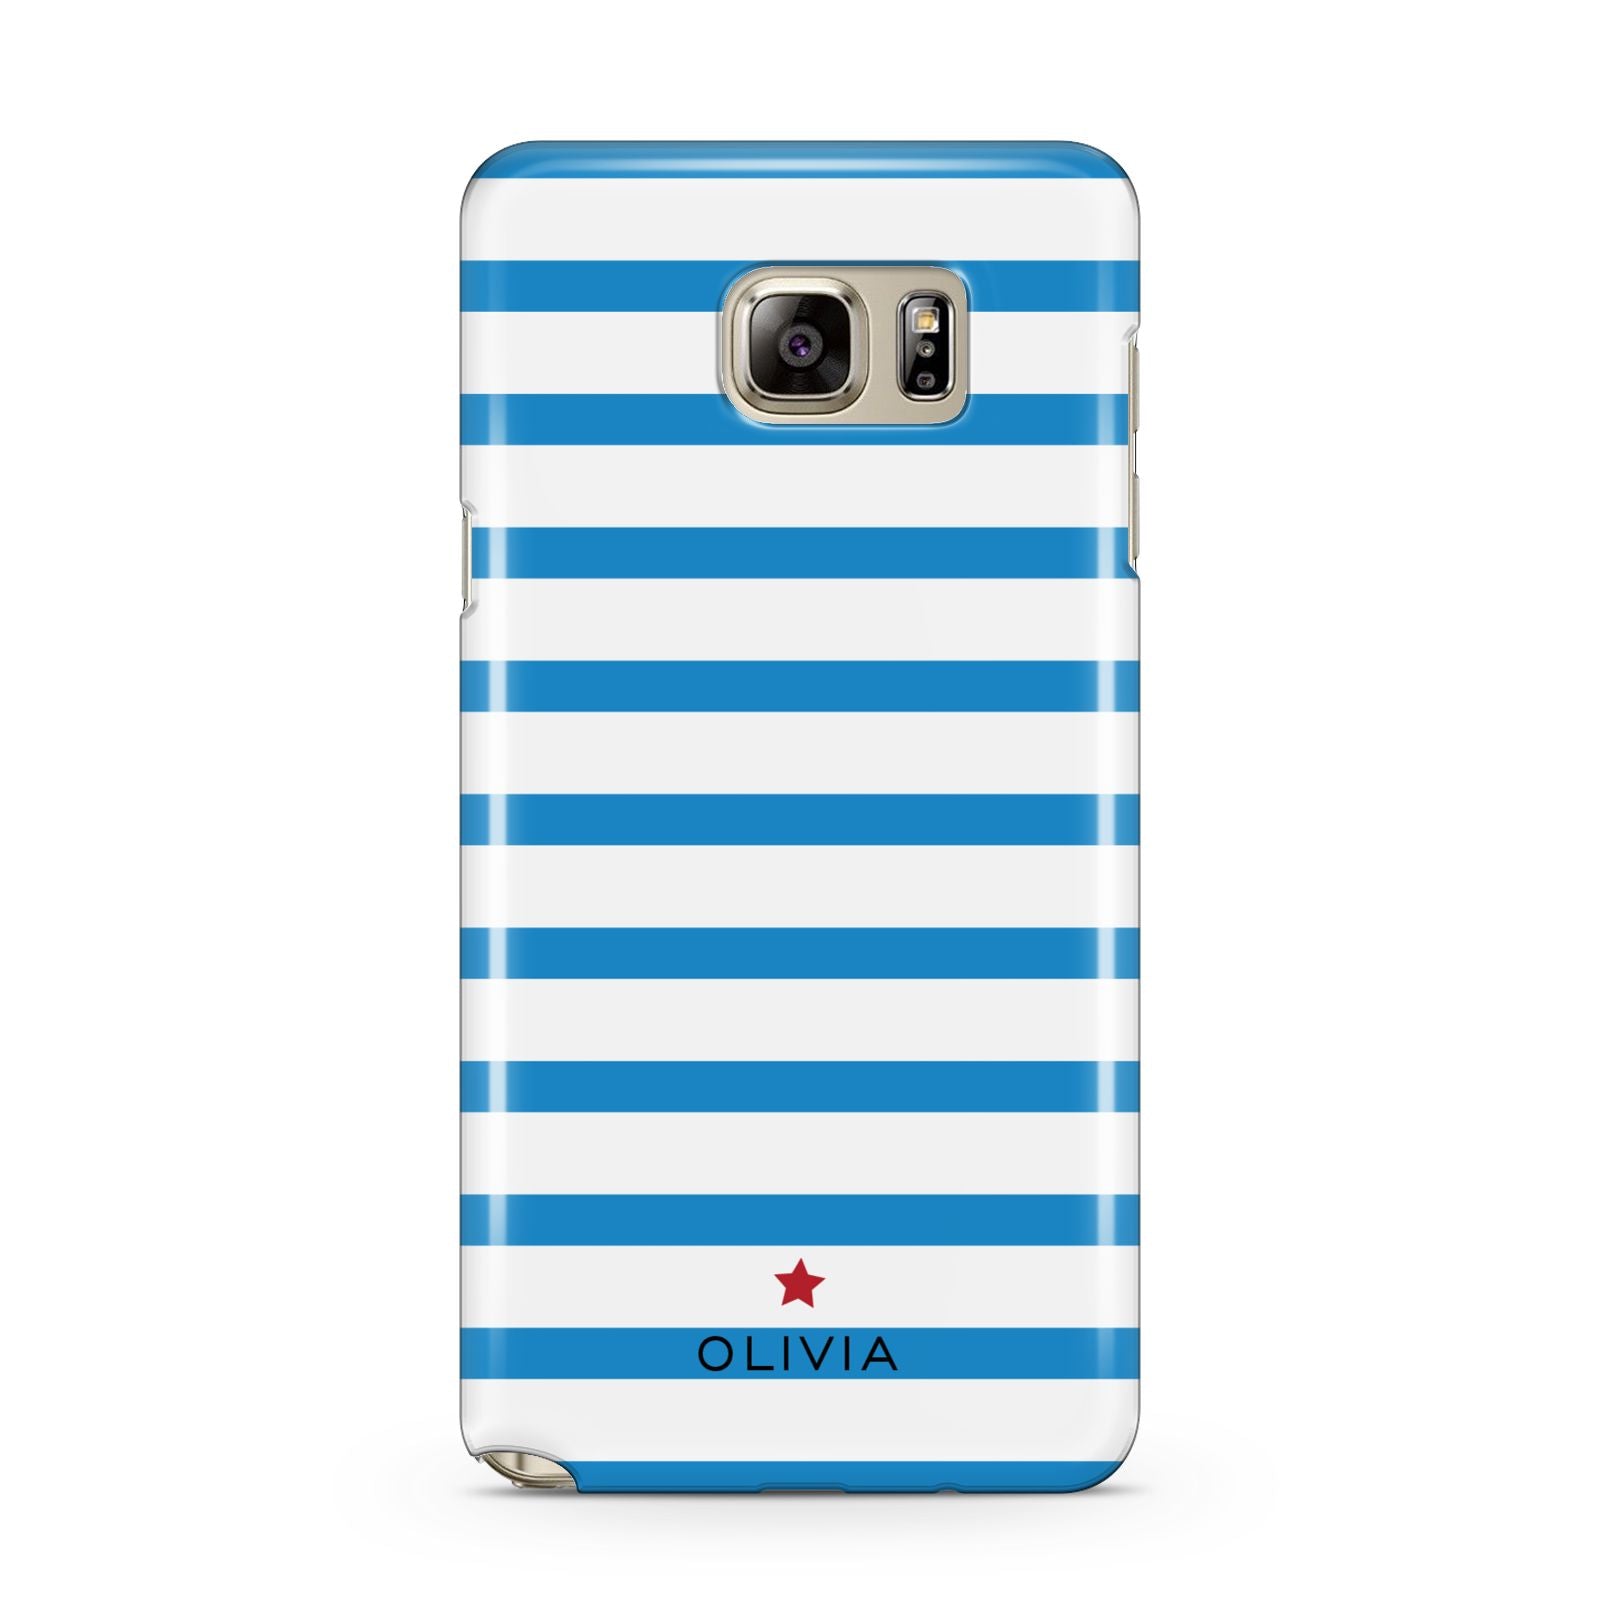 Personalised Name Blue White Samsung Galaxy Note 5 Case